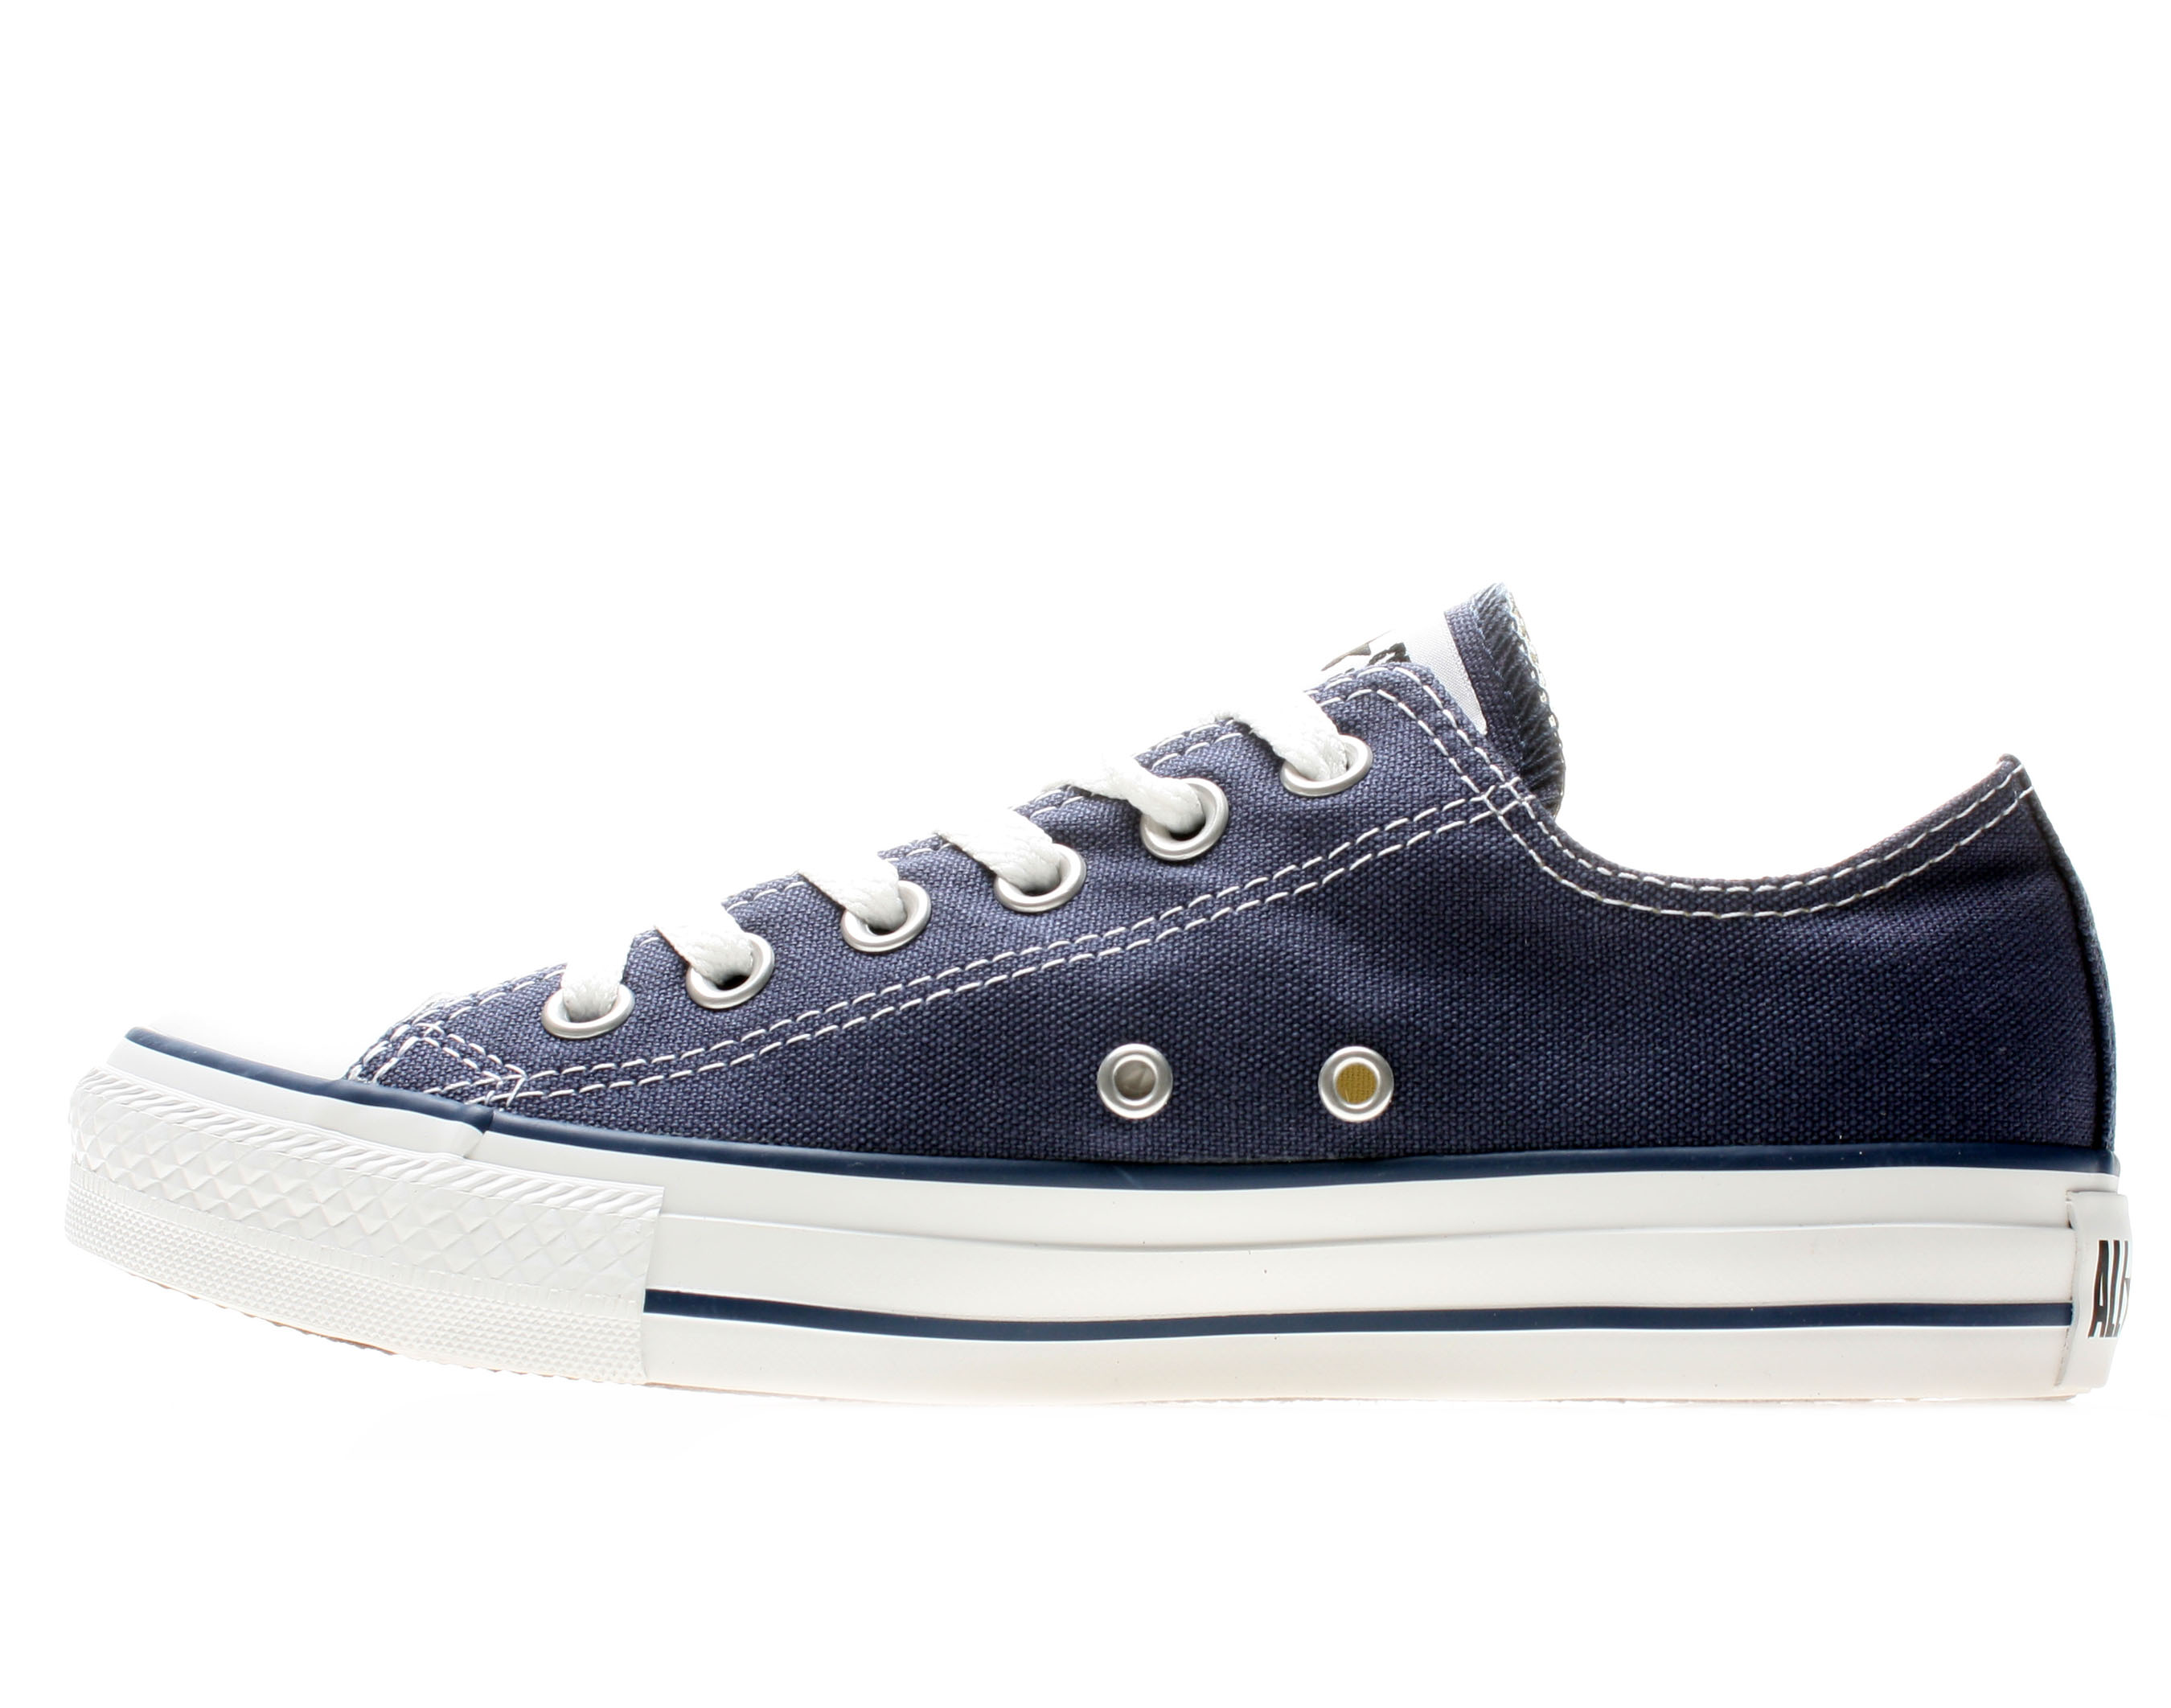 CONVERSE ALL STAR CHUCK TAYLOR LOW MEN'S NAVY M9697 - image 3 of 6